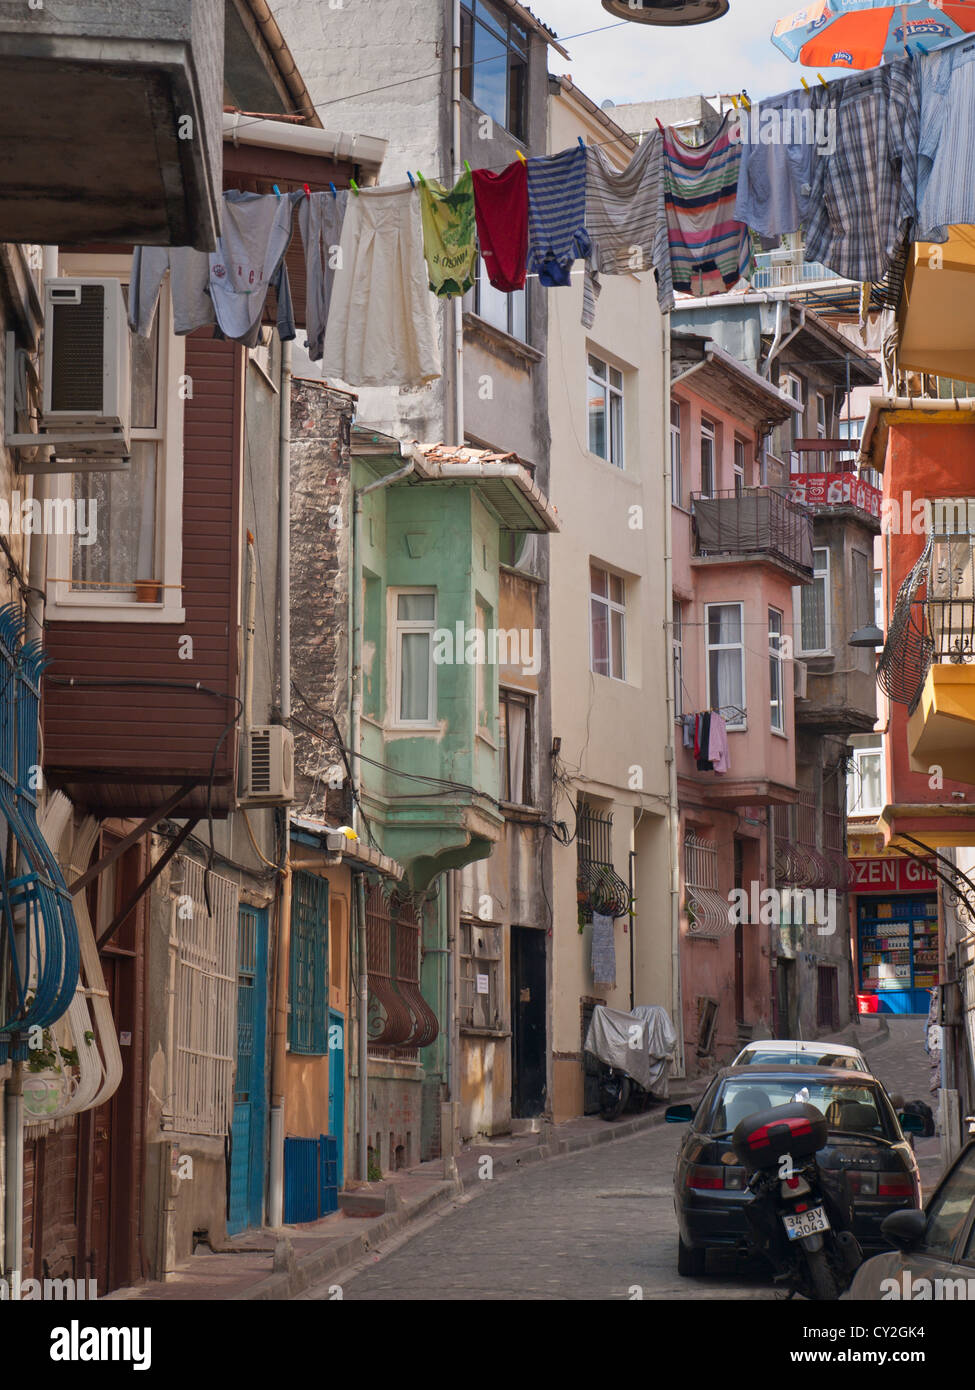 Clothes line, washing and  old houses in traditional Turkish style in a street in  the Balat district of Istanbul Turkey Stock Photo